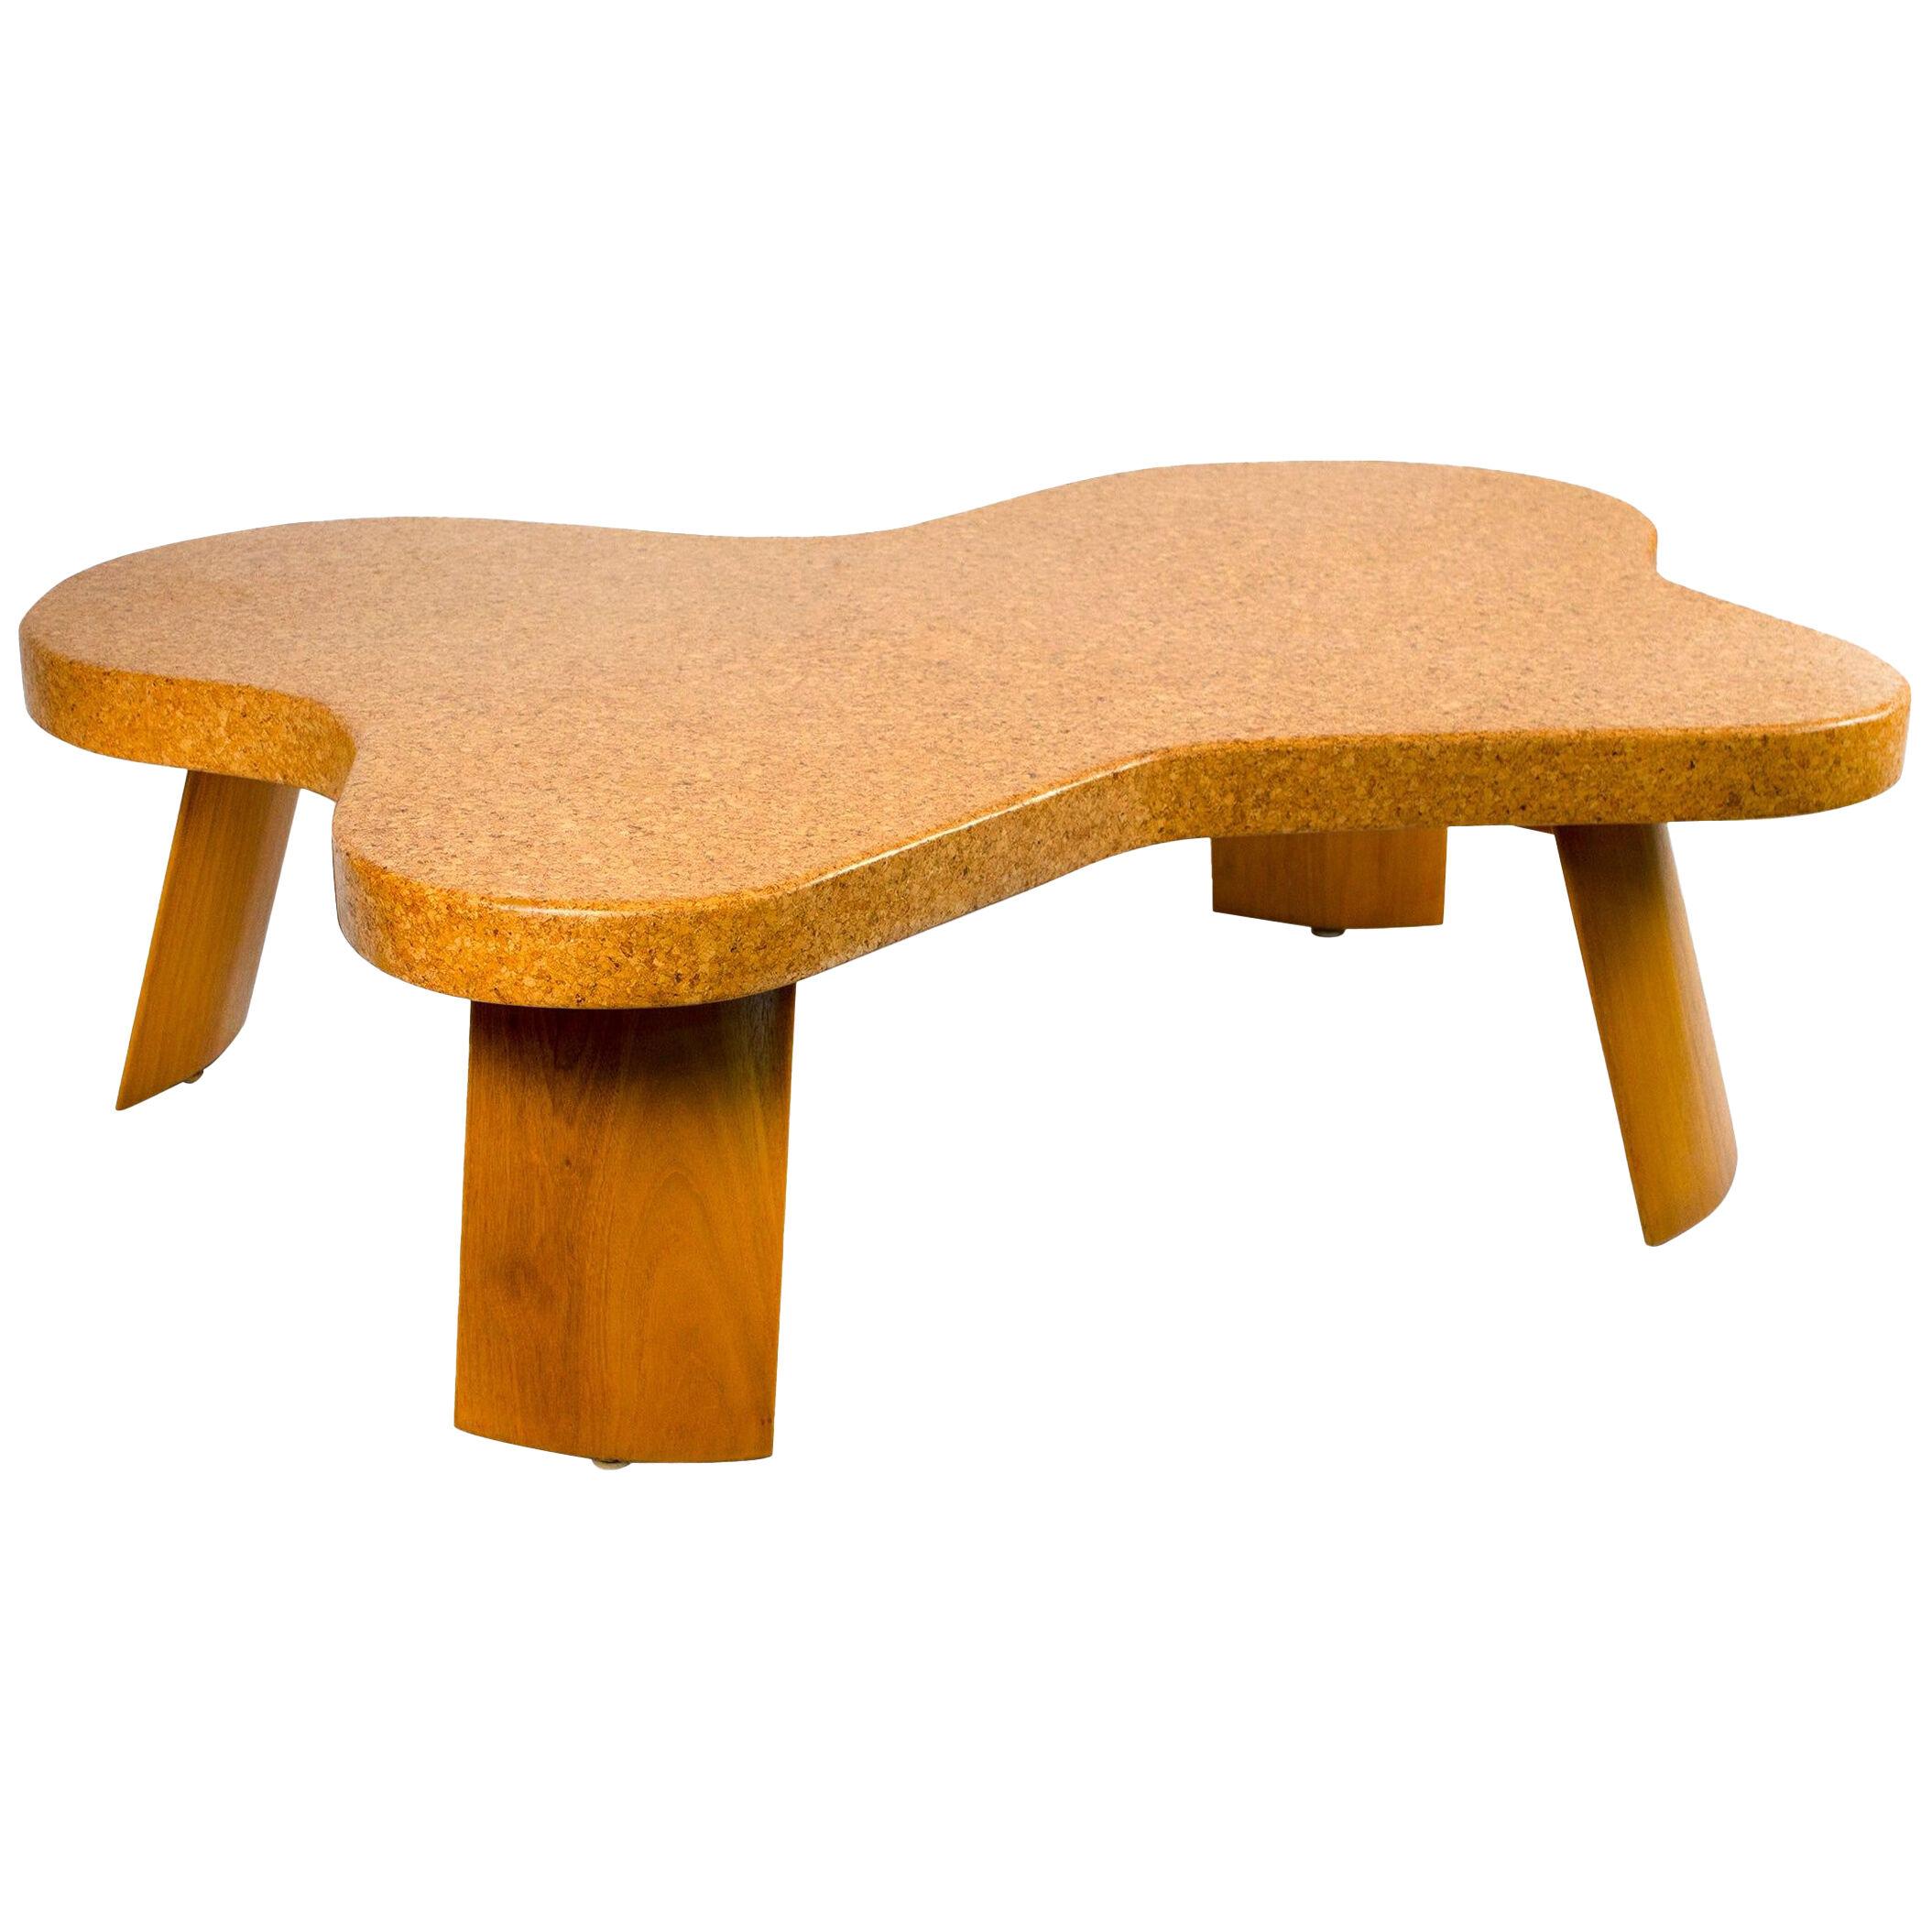 Iconic Cloud Coffee Table by Paul T Frankl Frankl for Johnson Furniture	